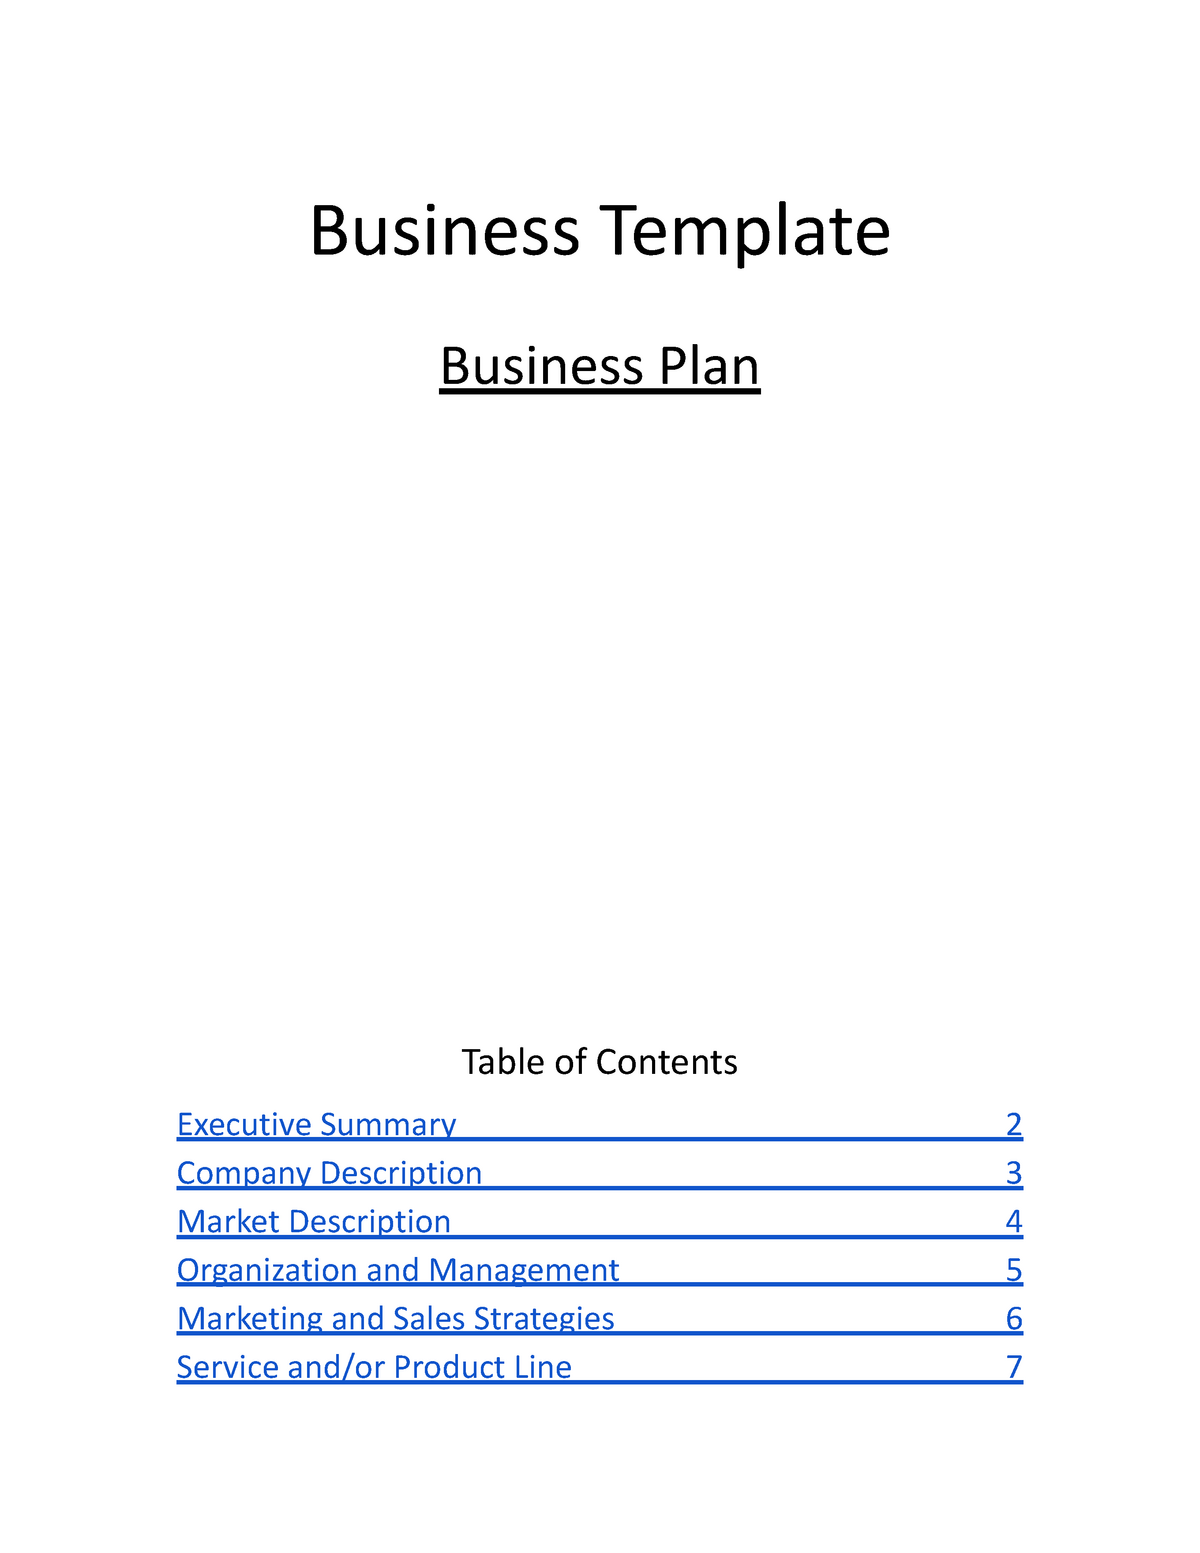 business-plan-for-food-business-business-template-business-plan-table